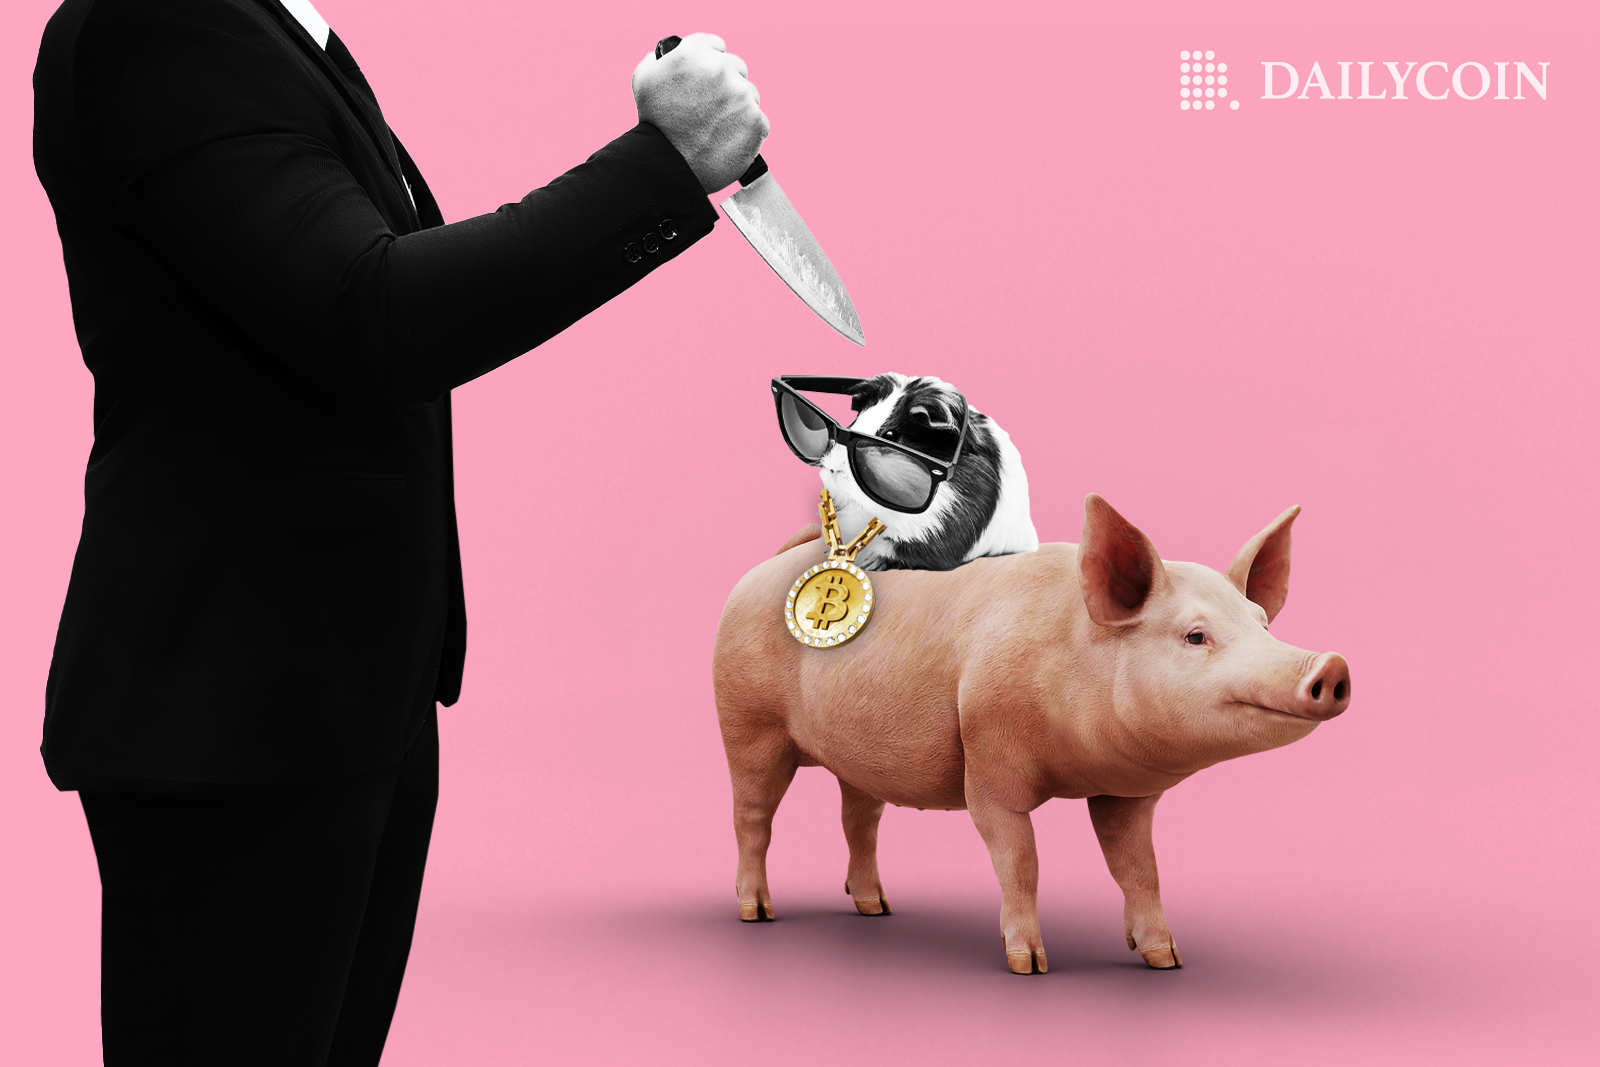 A man in black suit holding a knife and threatening innocent looking pink pig.